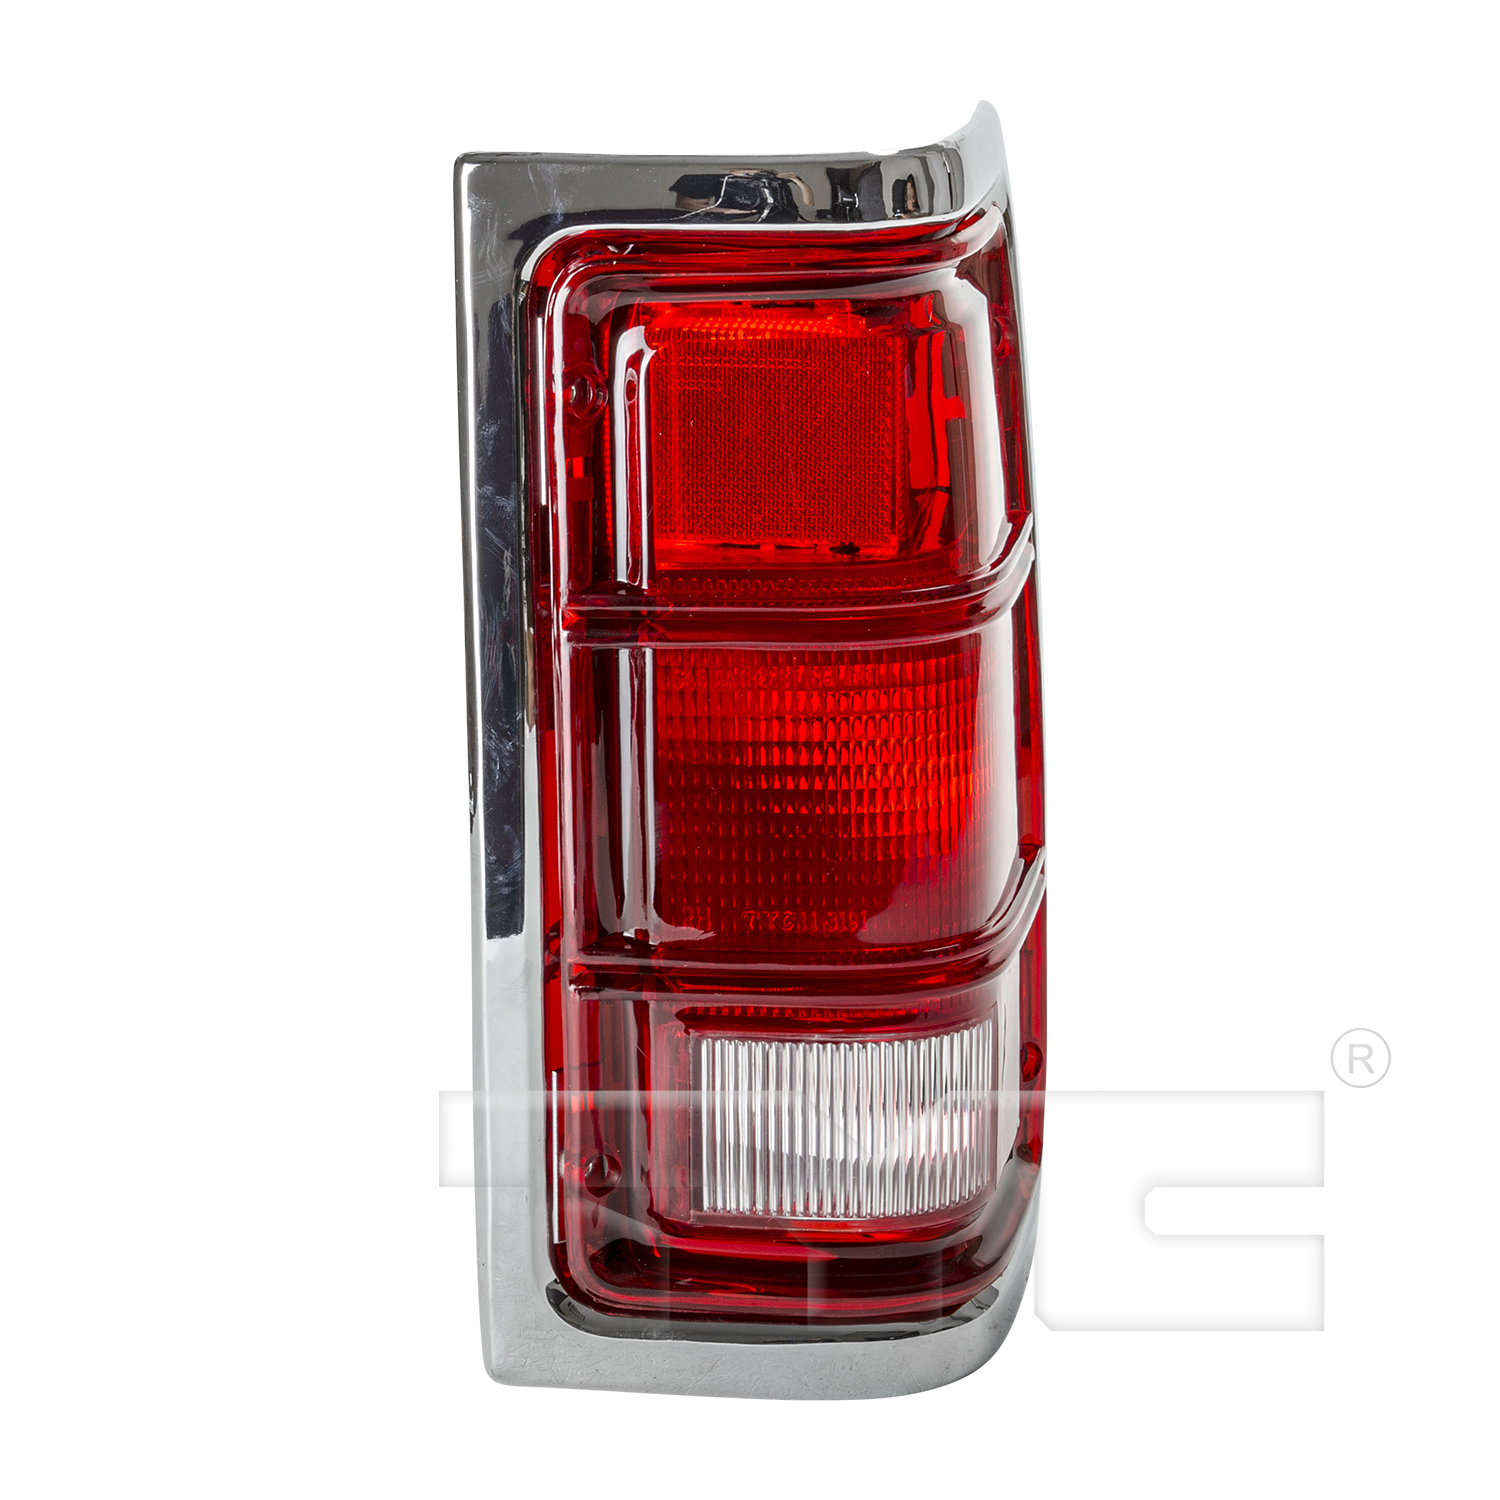 Aftermarket TAILLIGHTS for DODGE - D250, D250,92-93,RT Taillamp lens